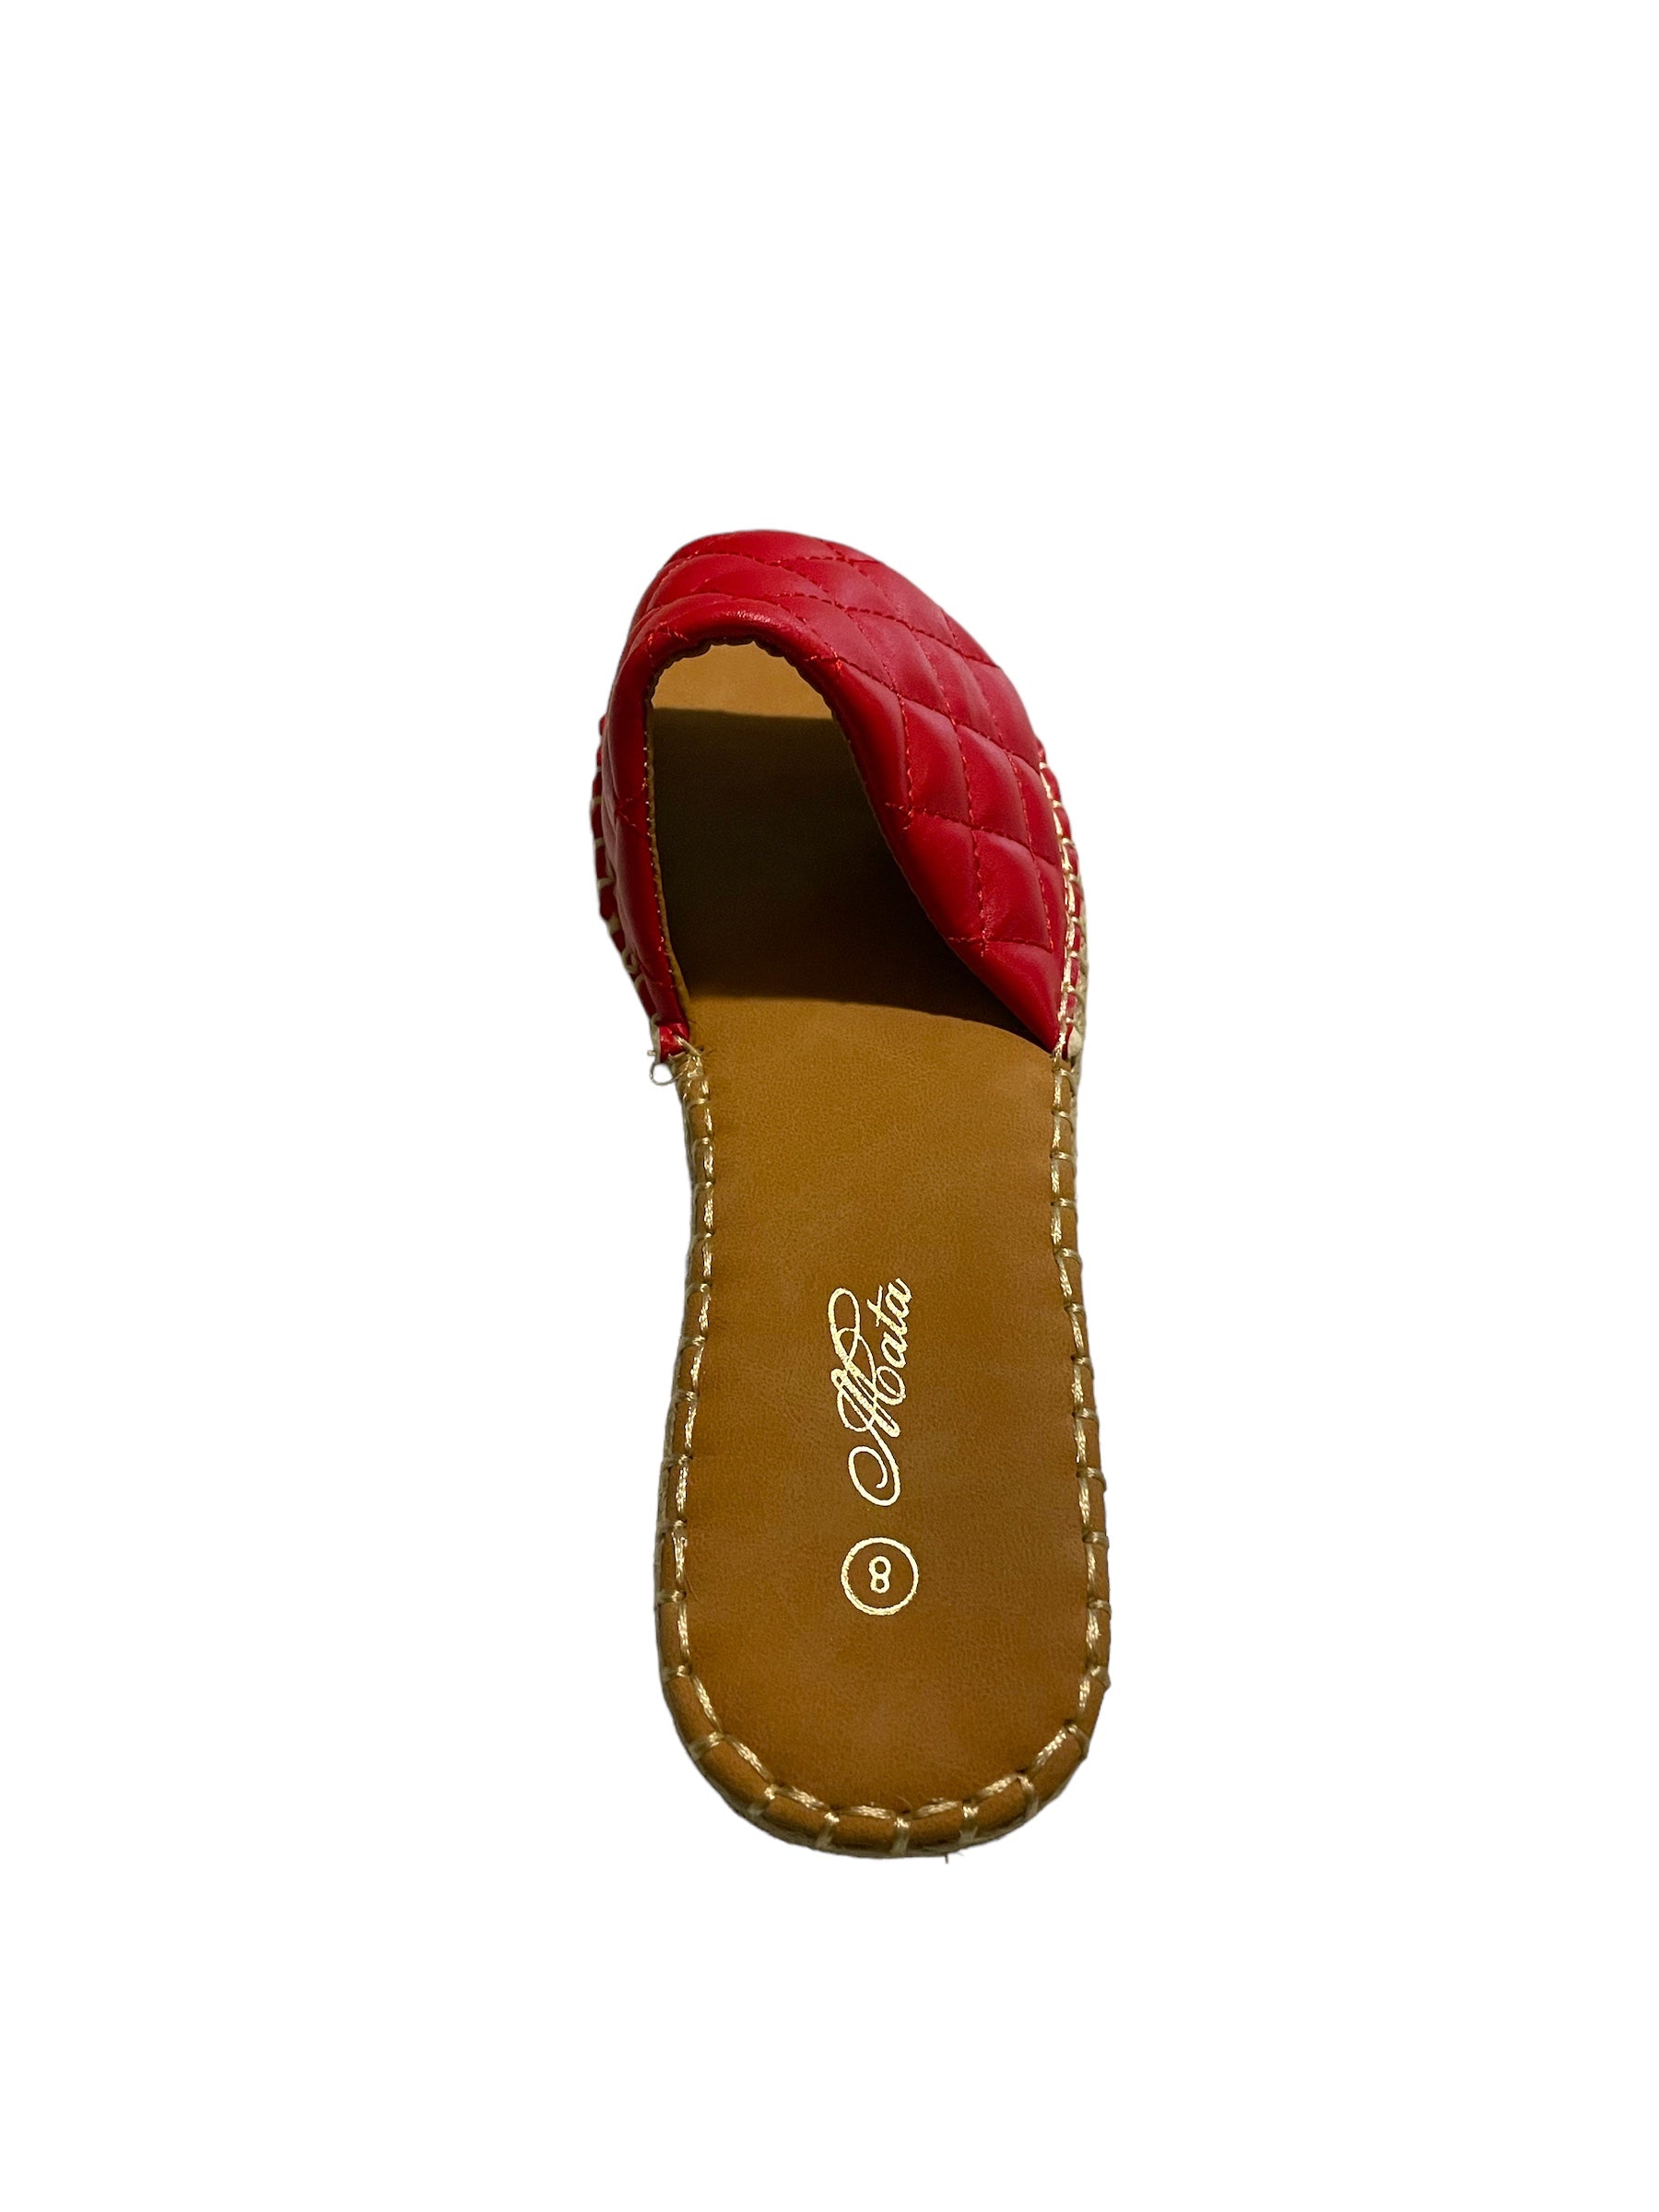 Mata Shoes Fable Flat Slide on Red Size 8 - Selzalot